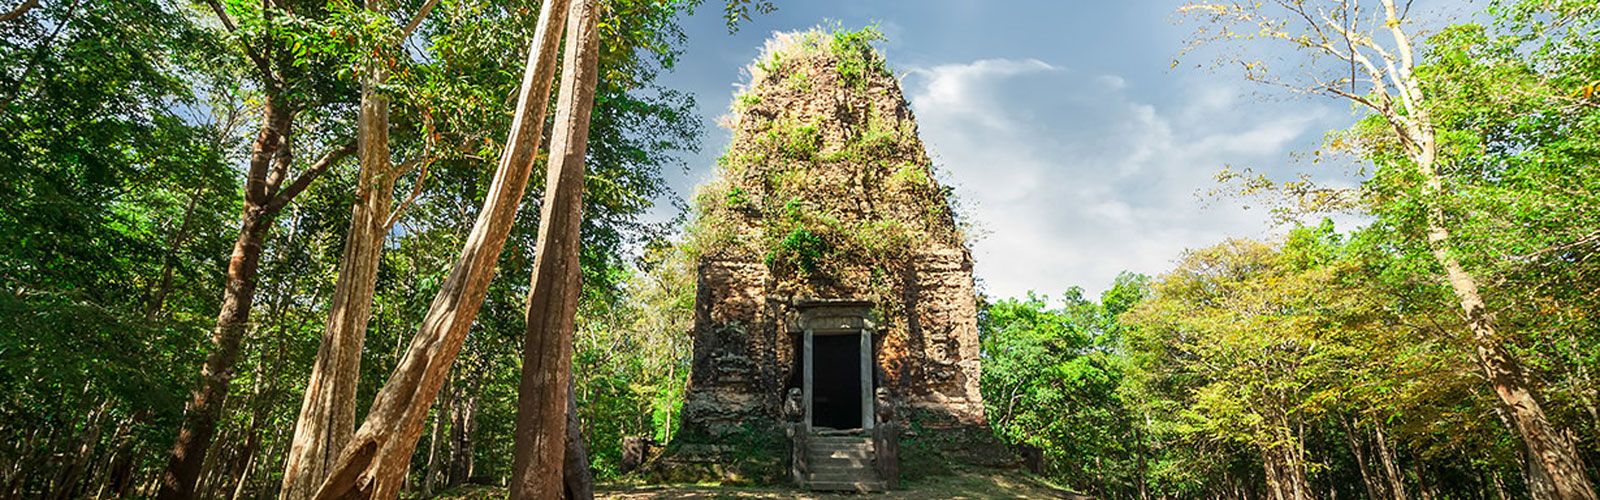 Kampong Thom Holidays | Asianventure Tours